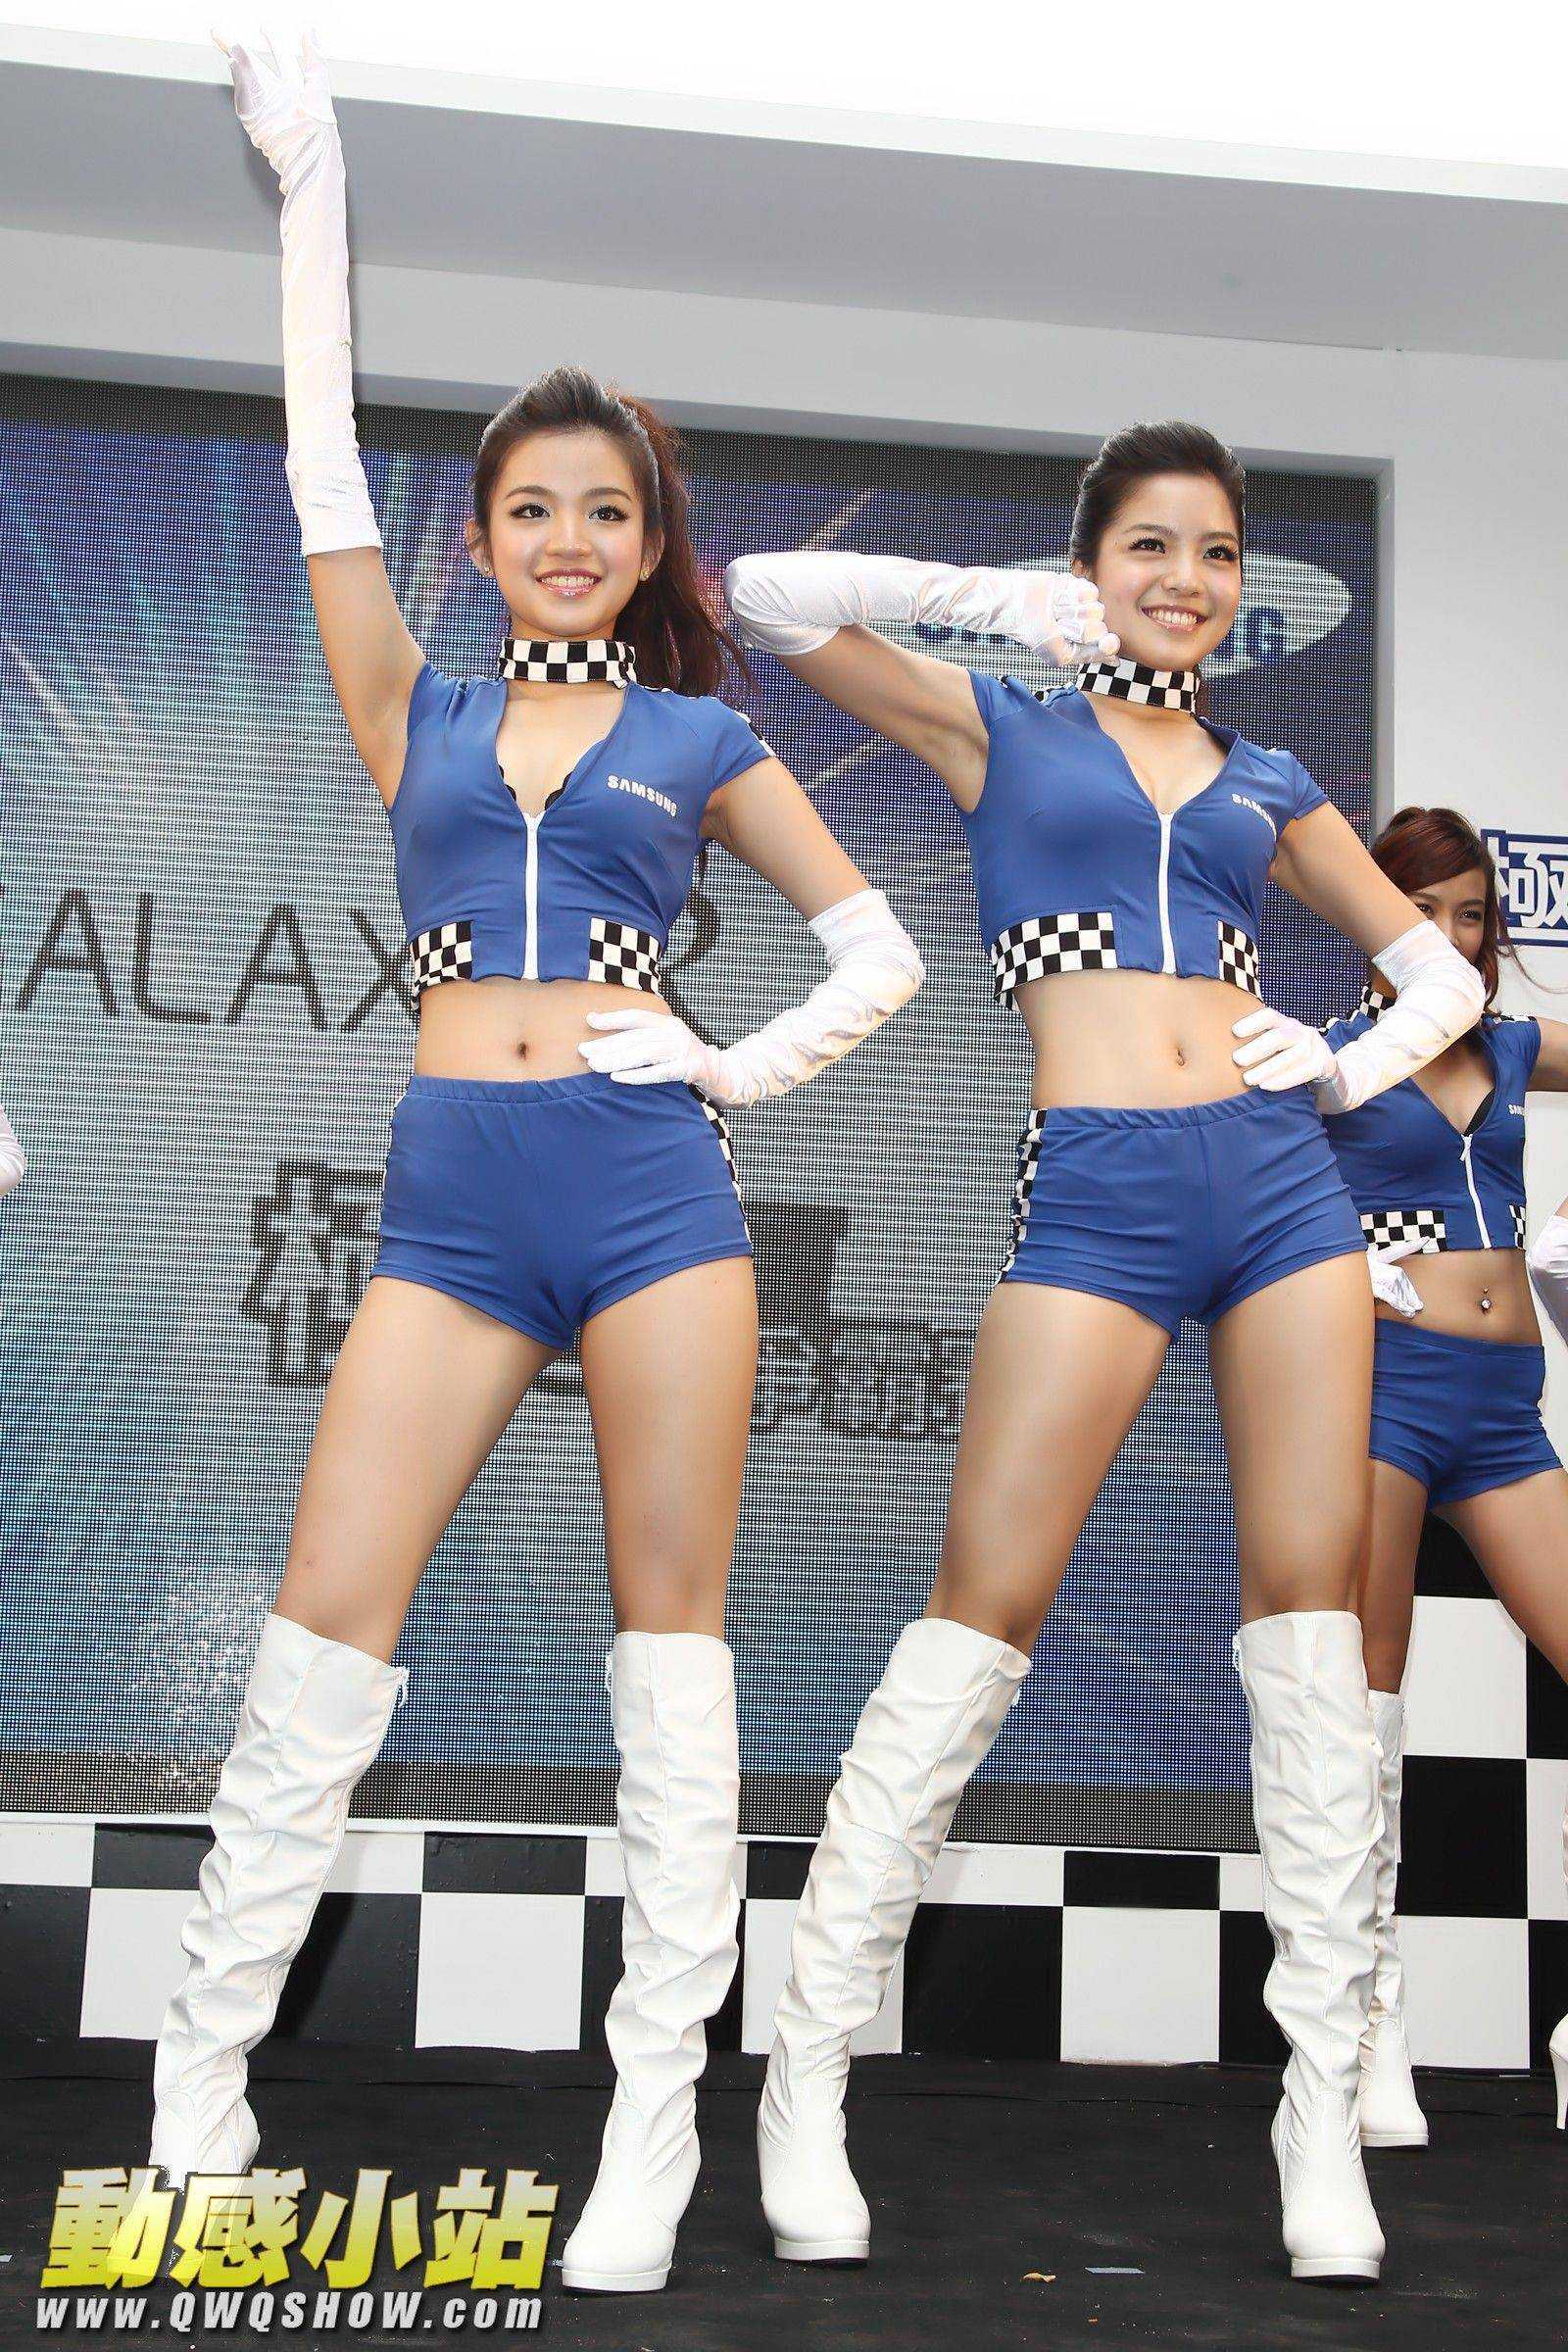 Opening dance of 1161-1170 Auto Show